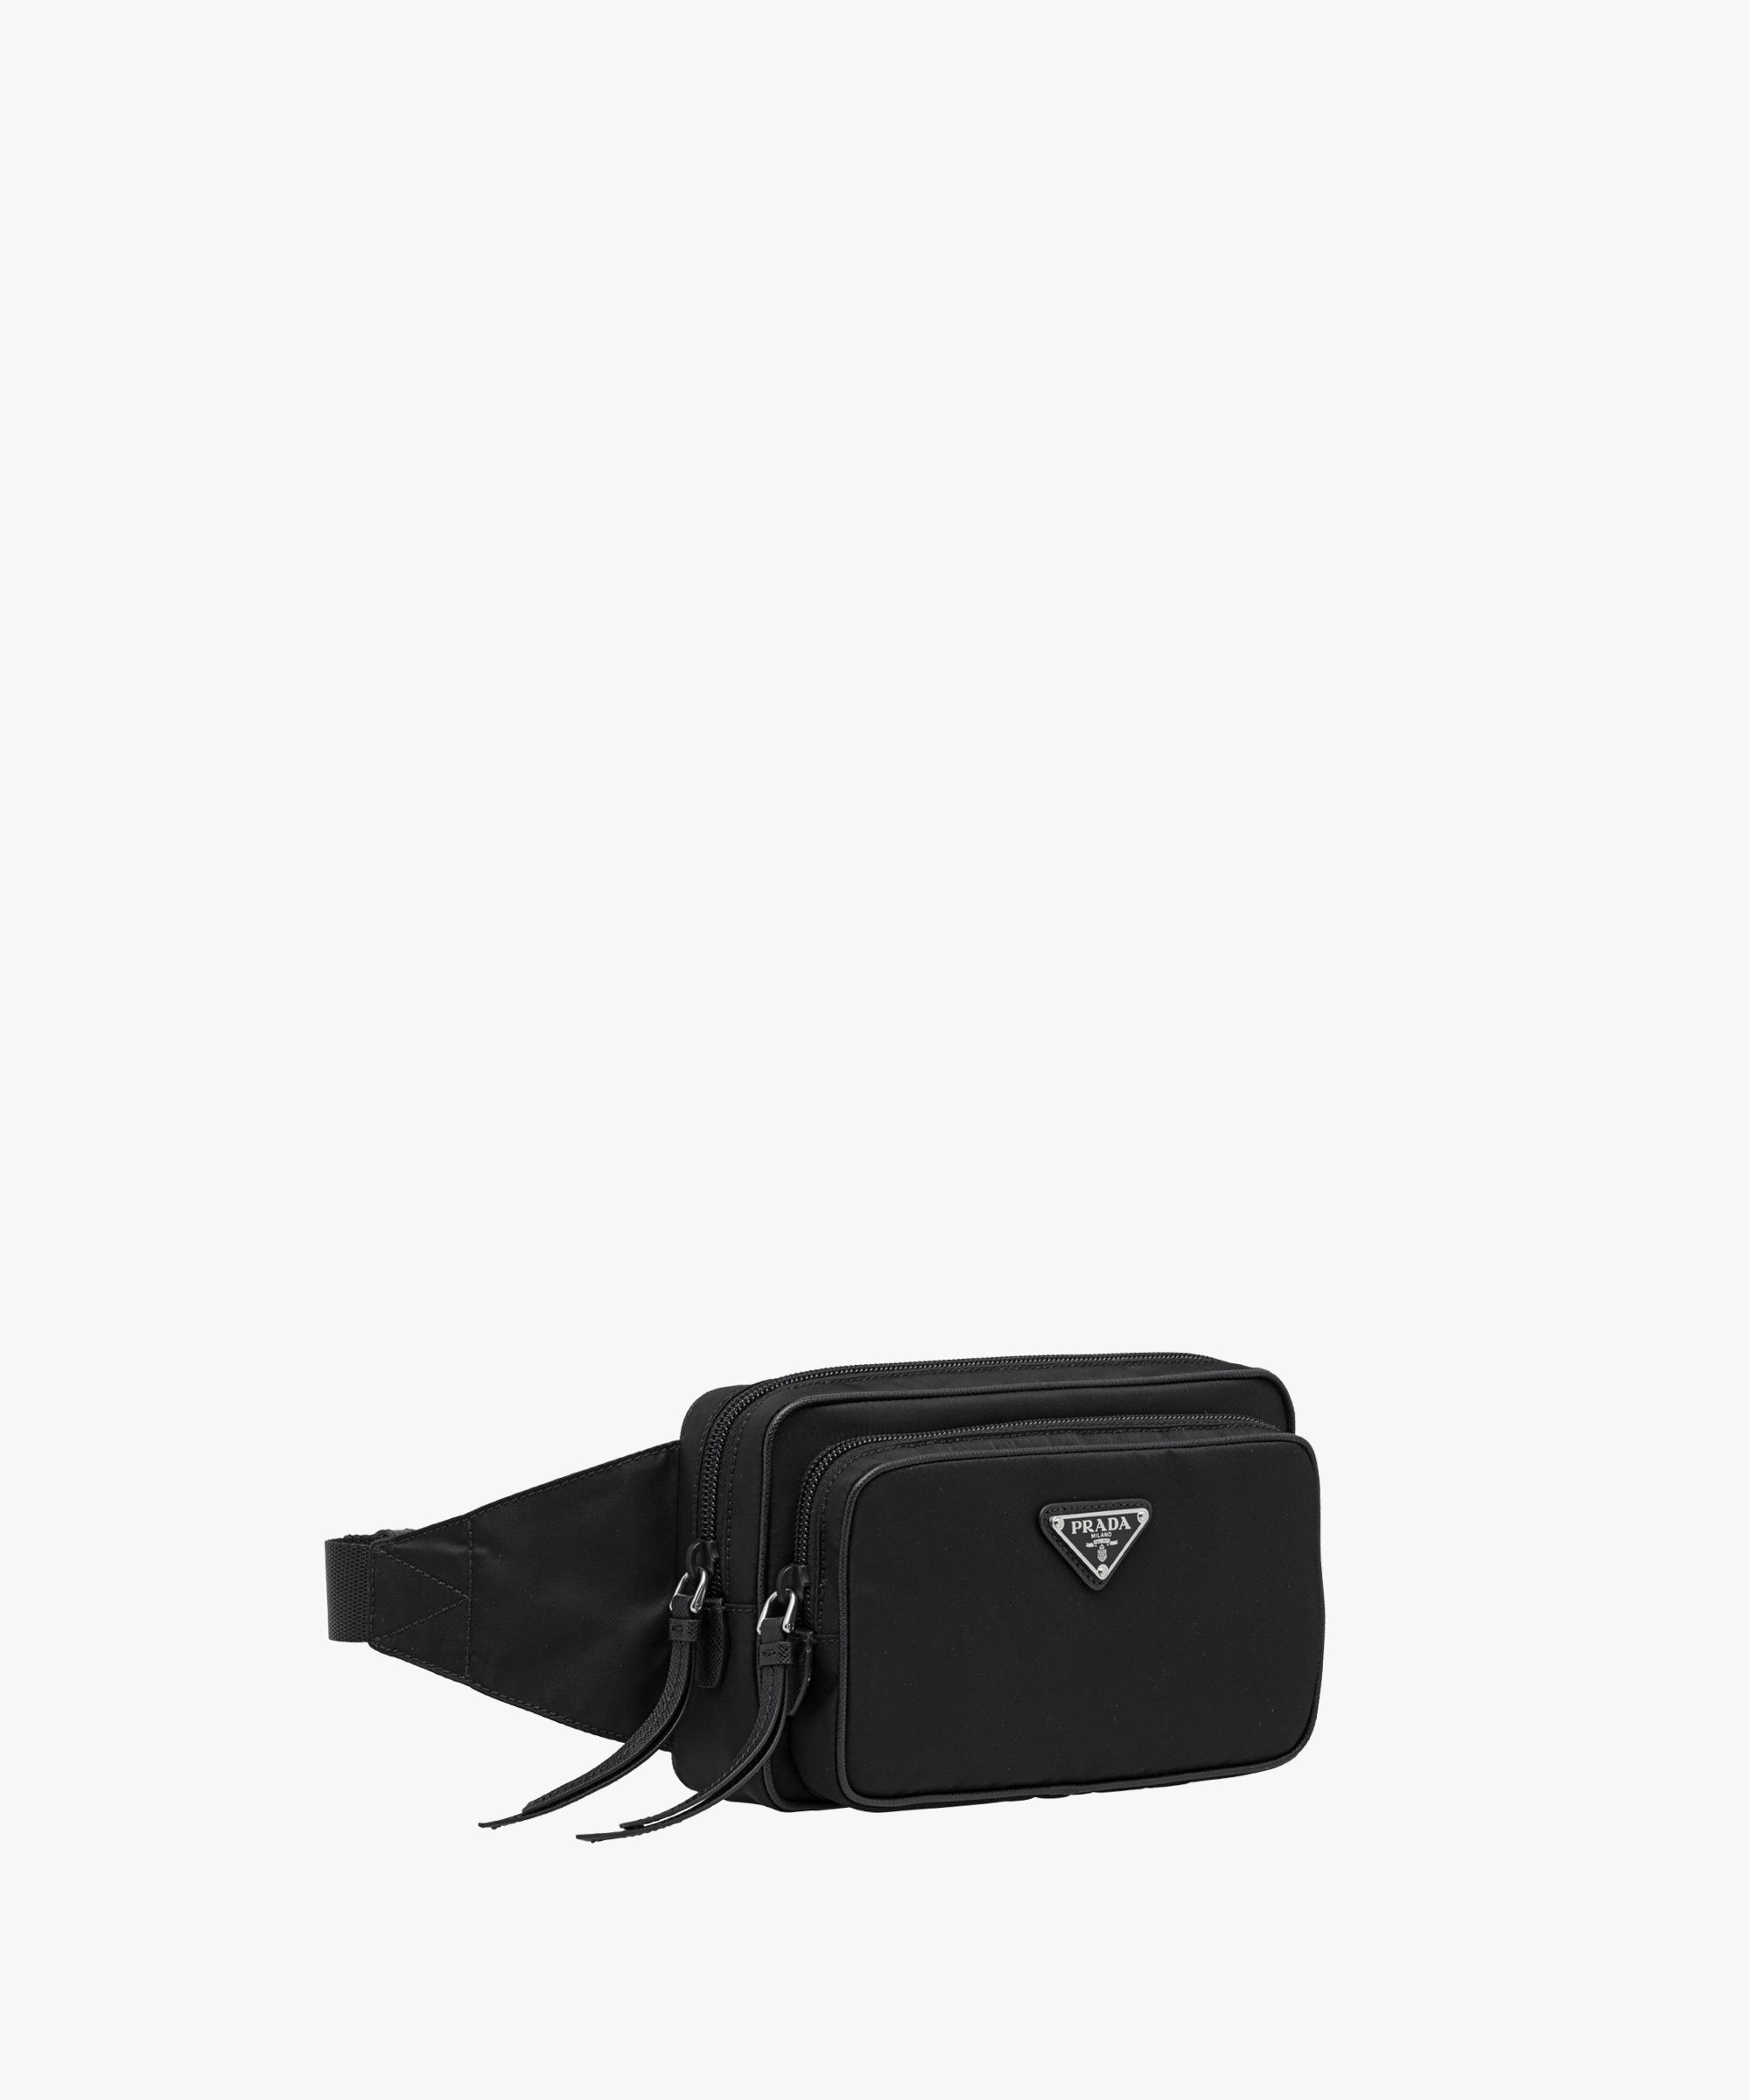 Prada Synthetic Nylon And Leather Belt Bag in Black for Men - Lyst